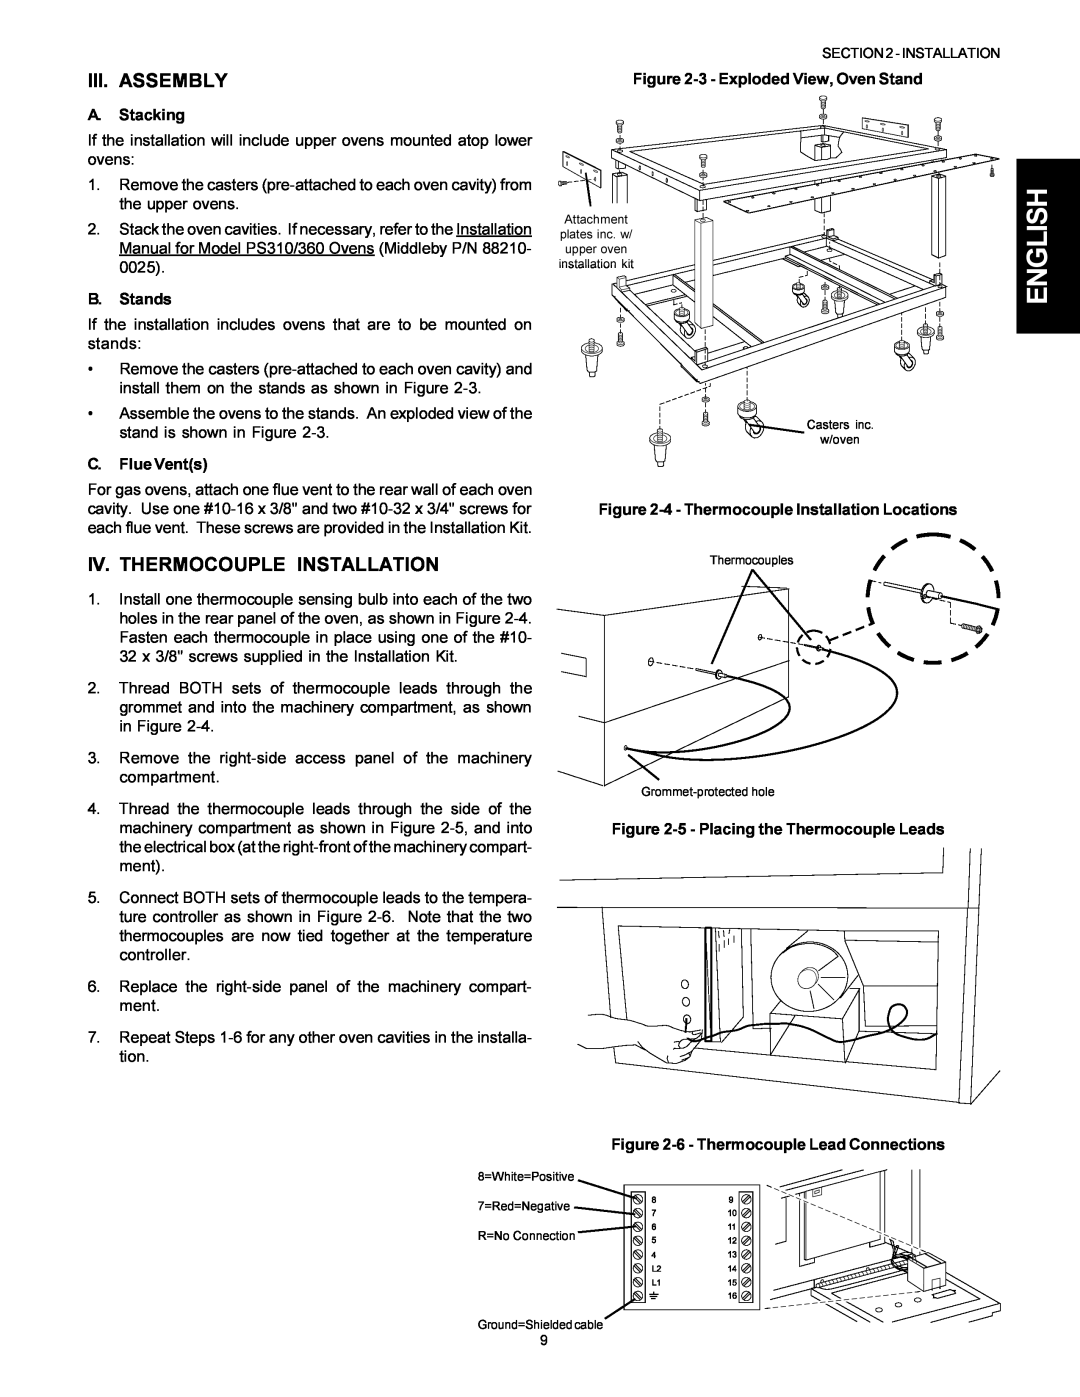 Middleby Marshall PS300F Iii. Assembly, Iv. Thermocouple Installation, A.Stacking, 3- Exploded View, Oven Stand, B.Stands 